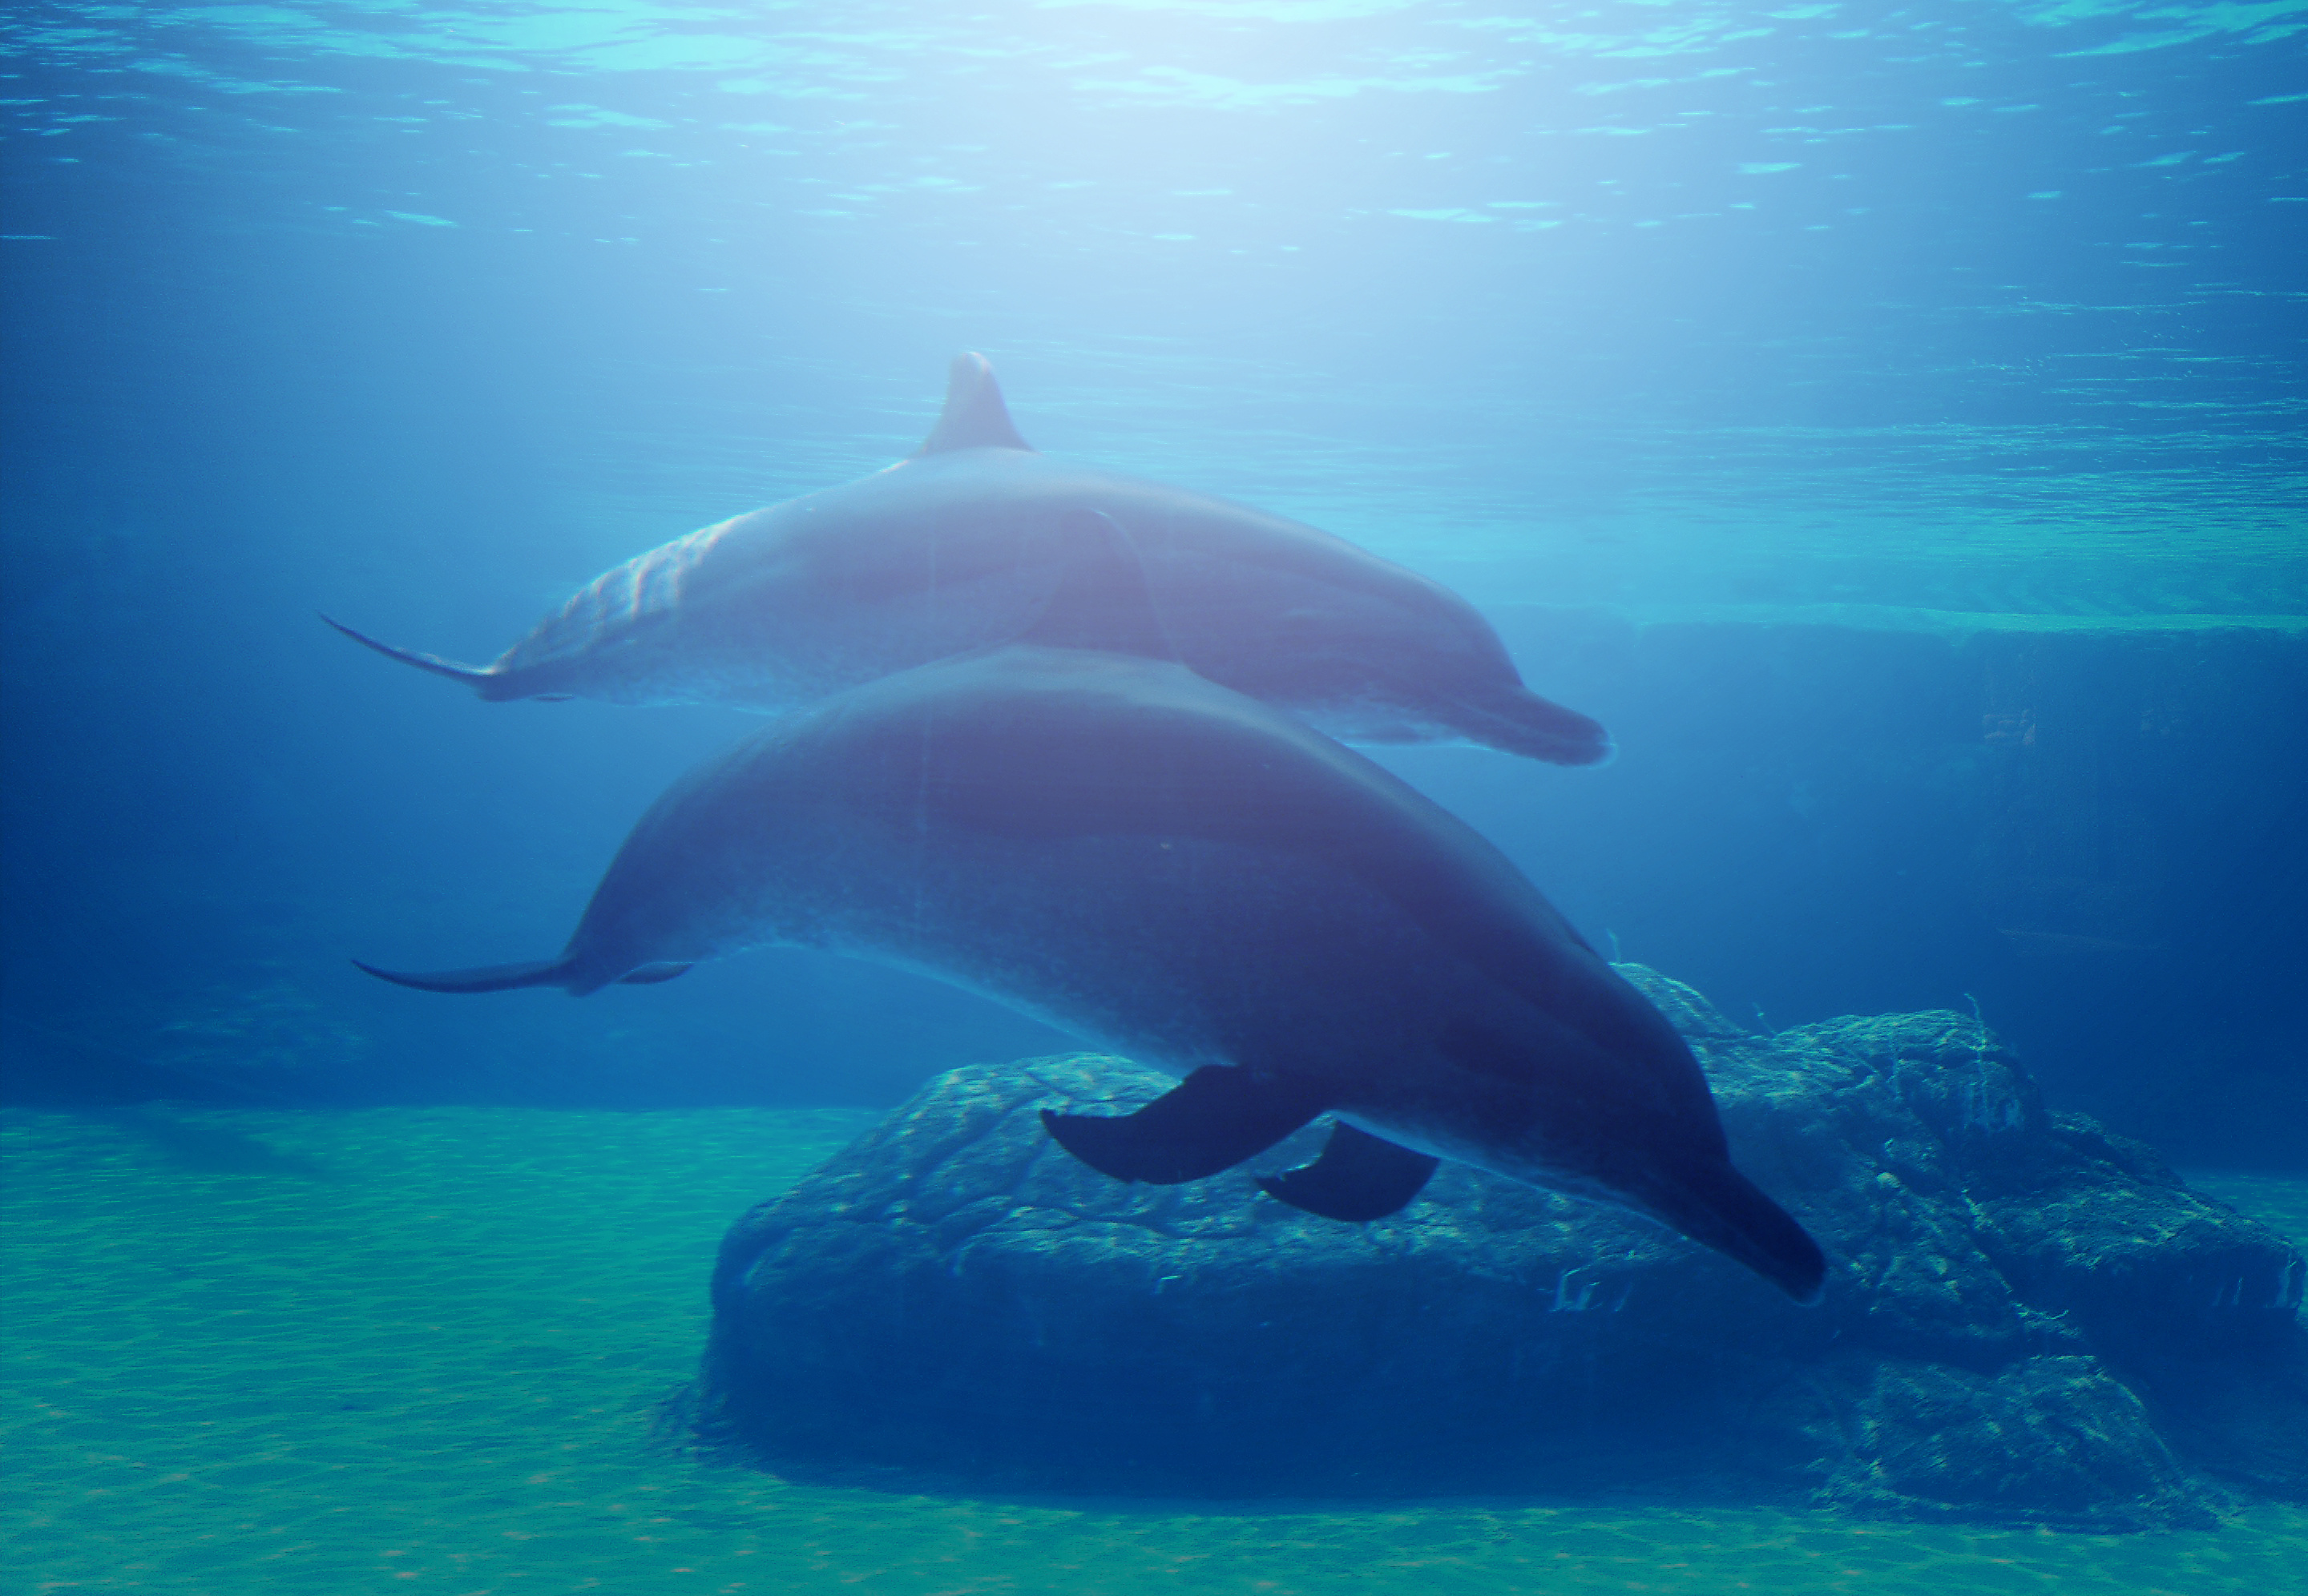 Download free photo of Dolphin,jumping,ocean,sea,water - from needpix.com